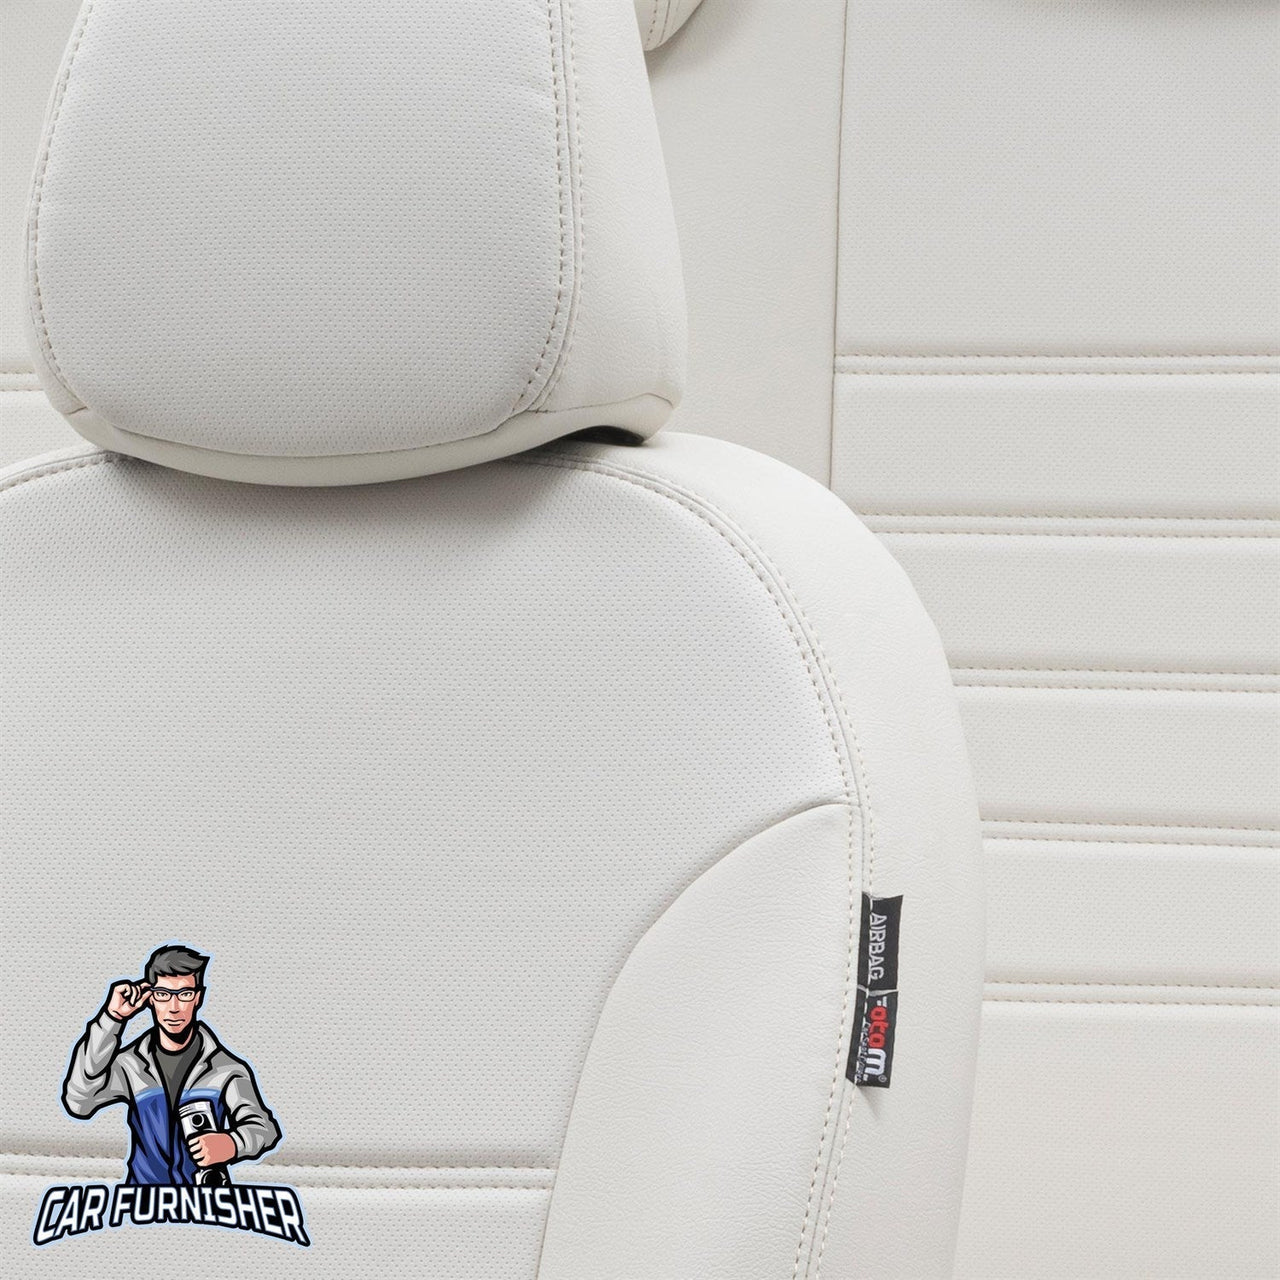 Chevrolet Spark Seat Covers Istanbul Leather Design Ivory Leather